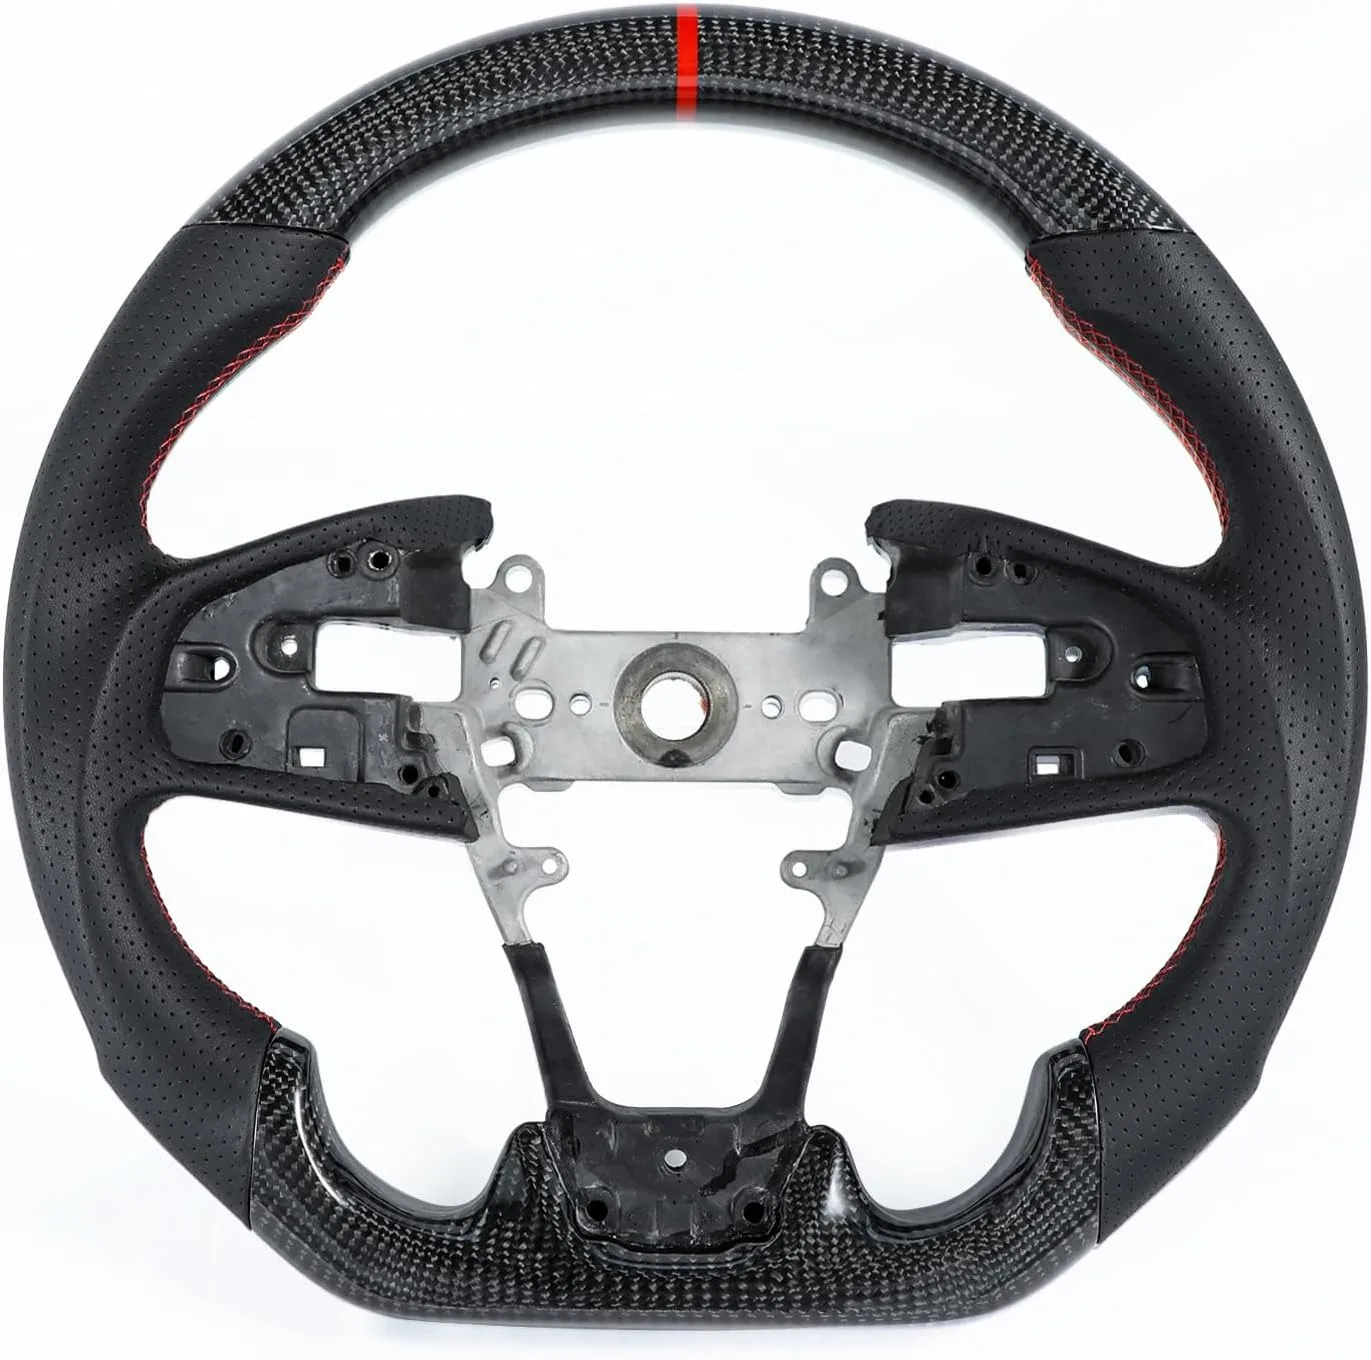 

Steering wheel Perforated Leather Steering Wheel Carbon Fiber, Compatible With 2016-2021 Honda Civic Gen 10th Type R